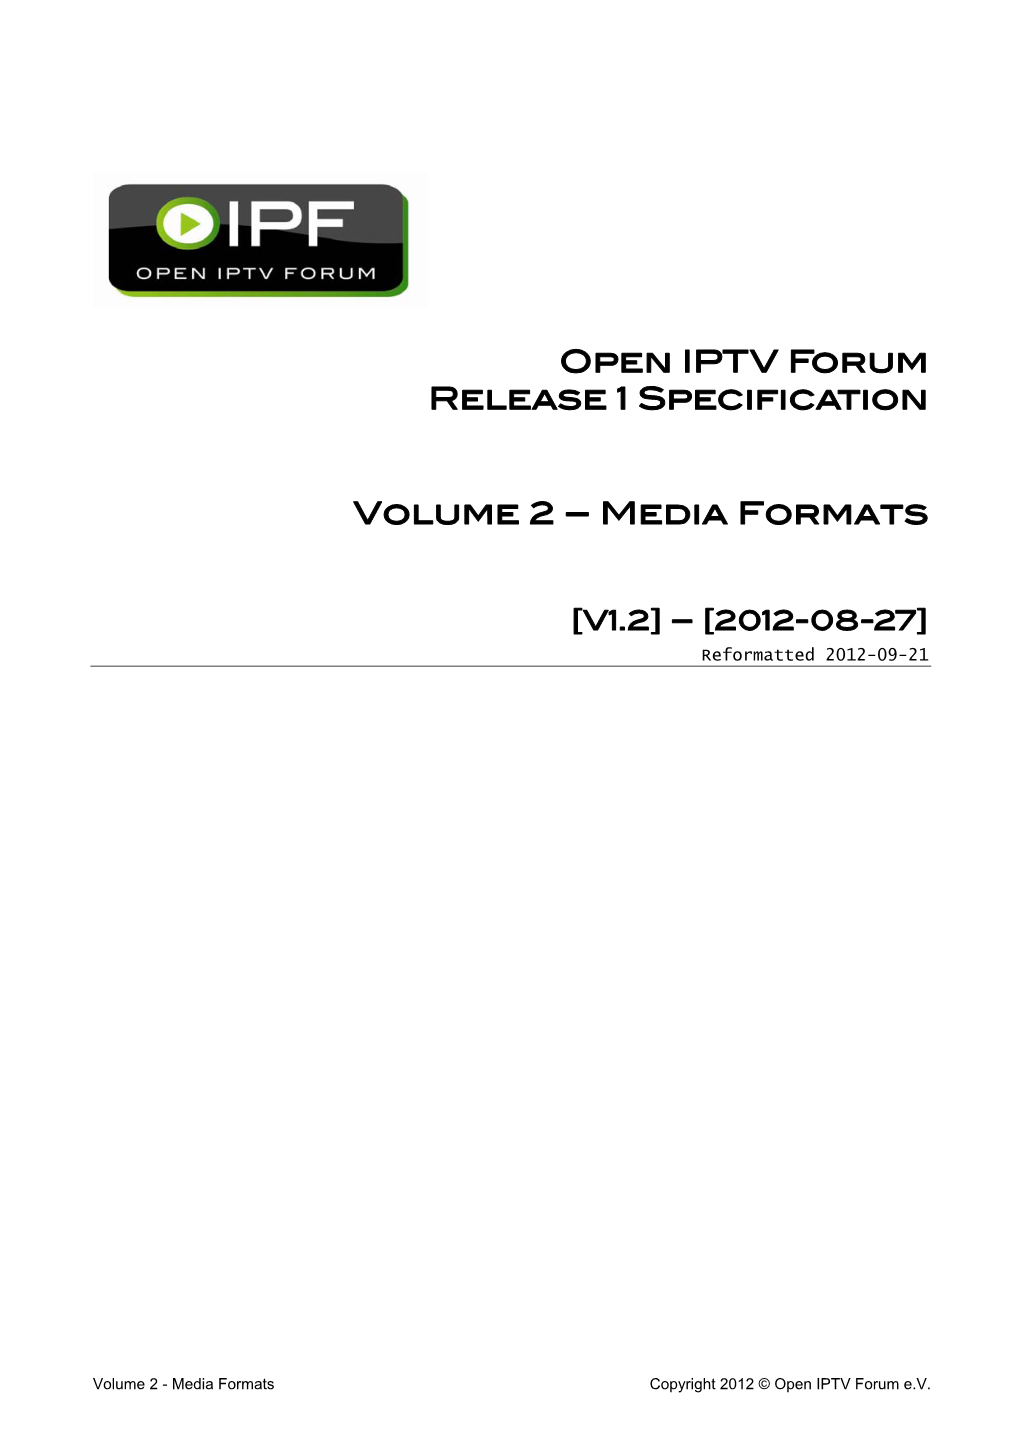 Release 1 Specification, Volume 2